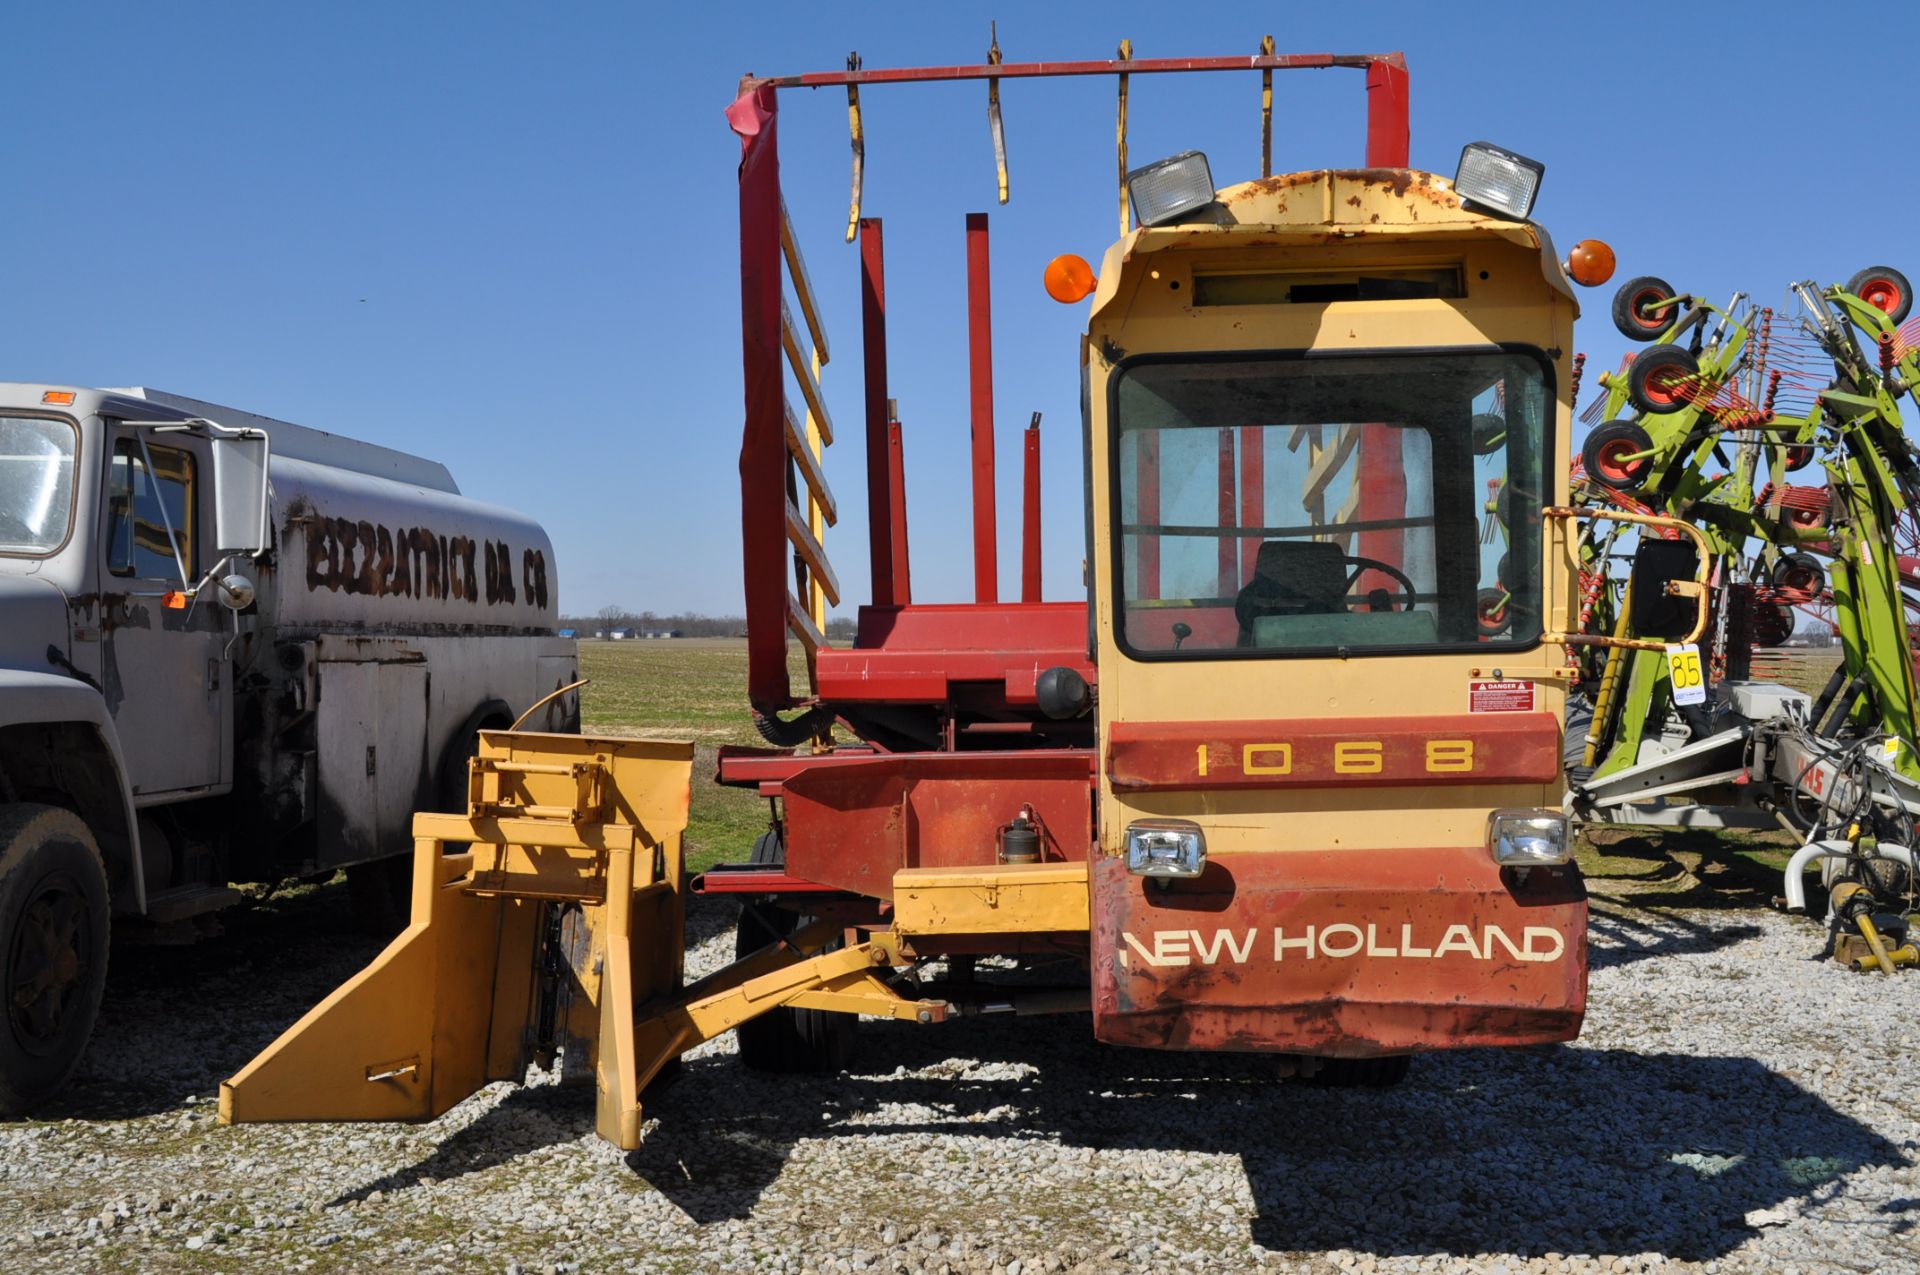 New Holland 1068 Hayliner stack wagon, diesel, 825-20 duals, 36x16.00-17.5 front, 9604 hrs, SN 1988 - Image 3 of 32